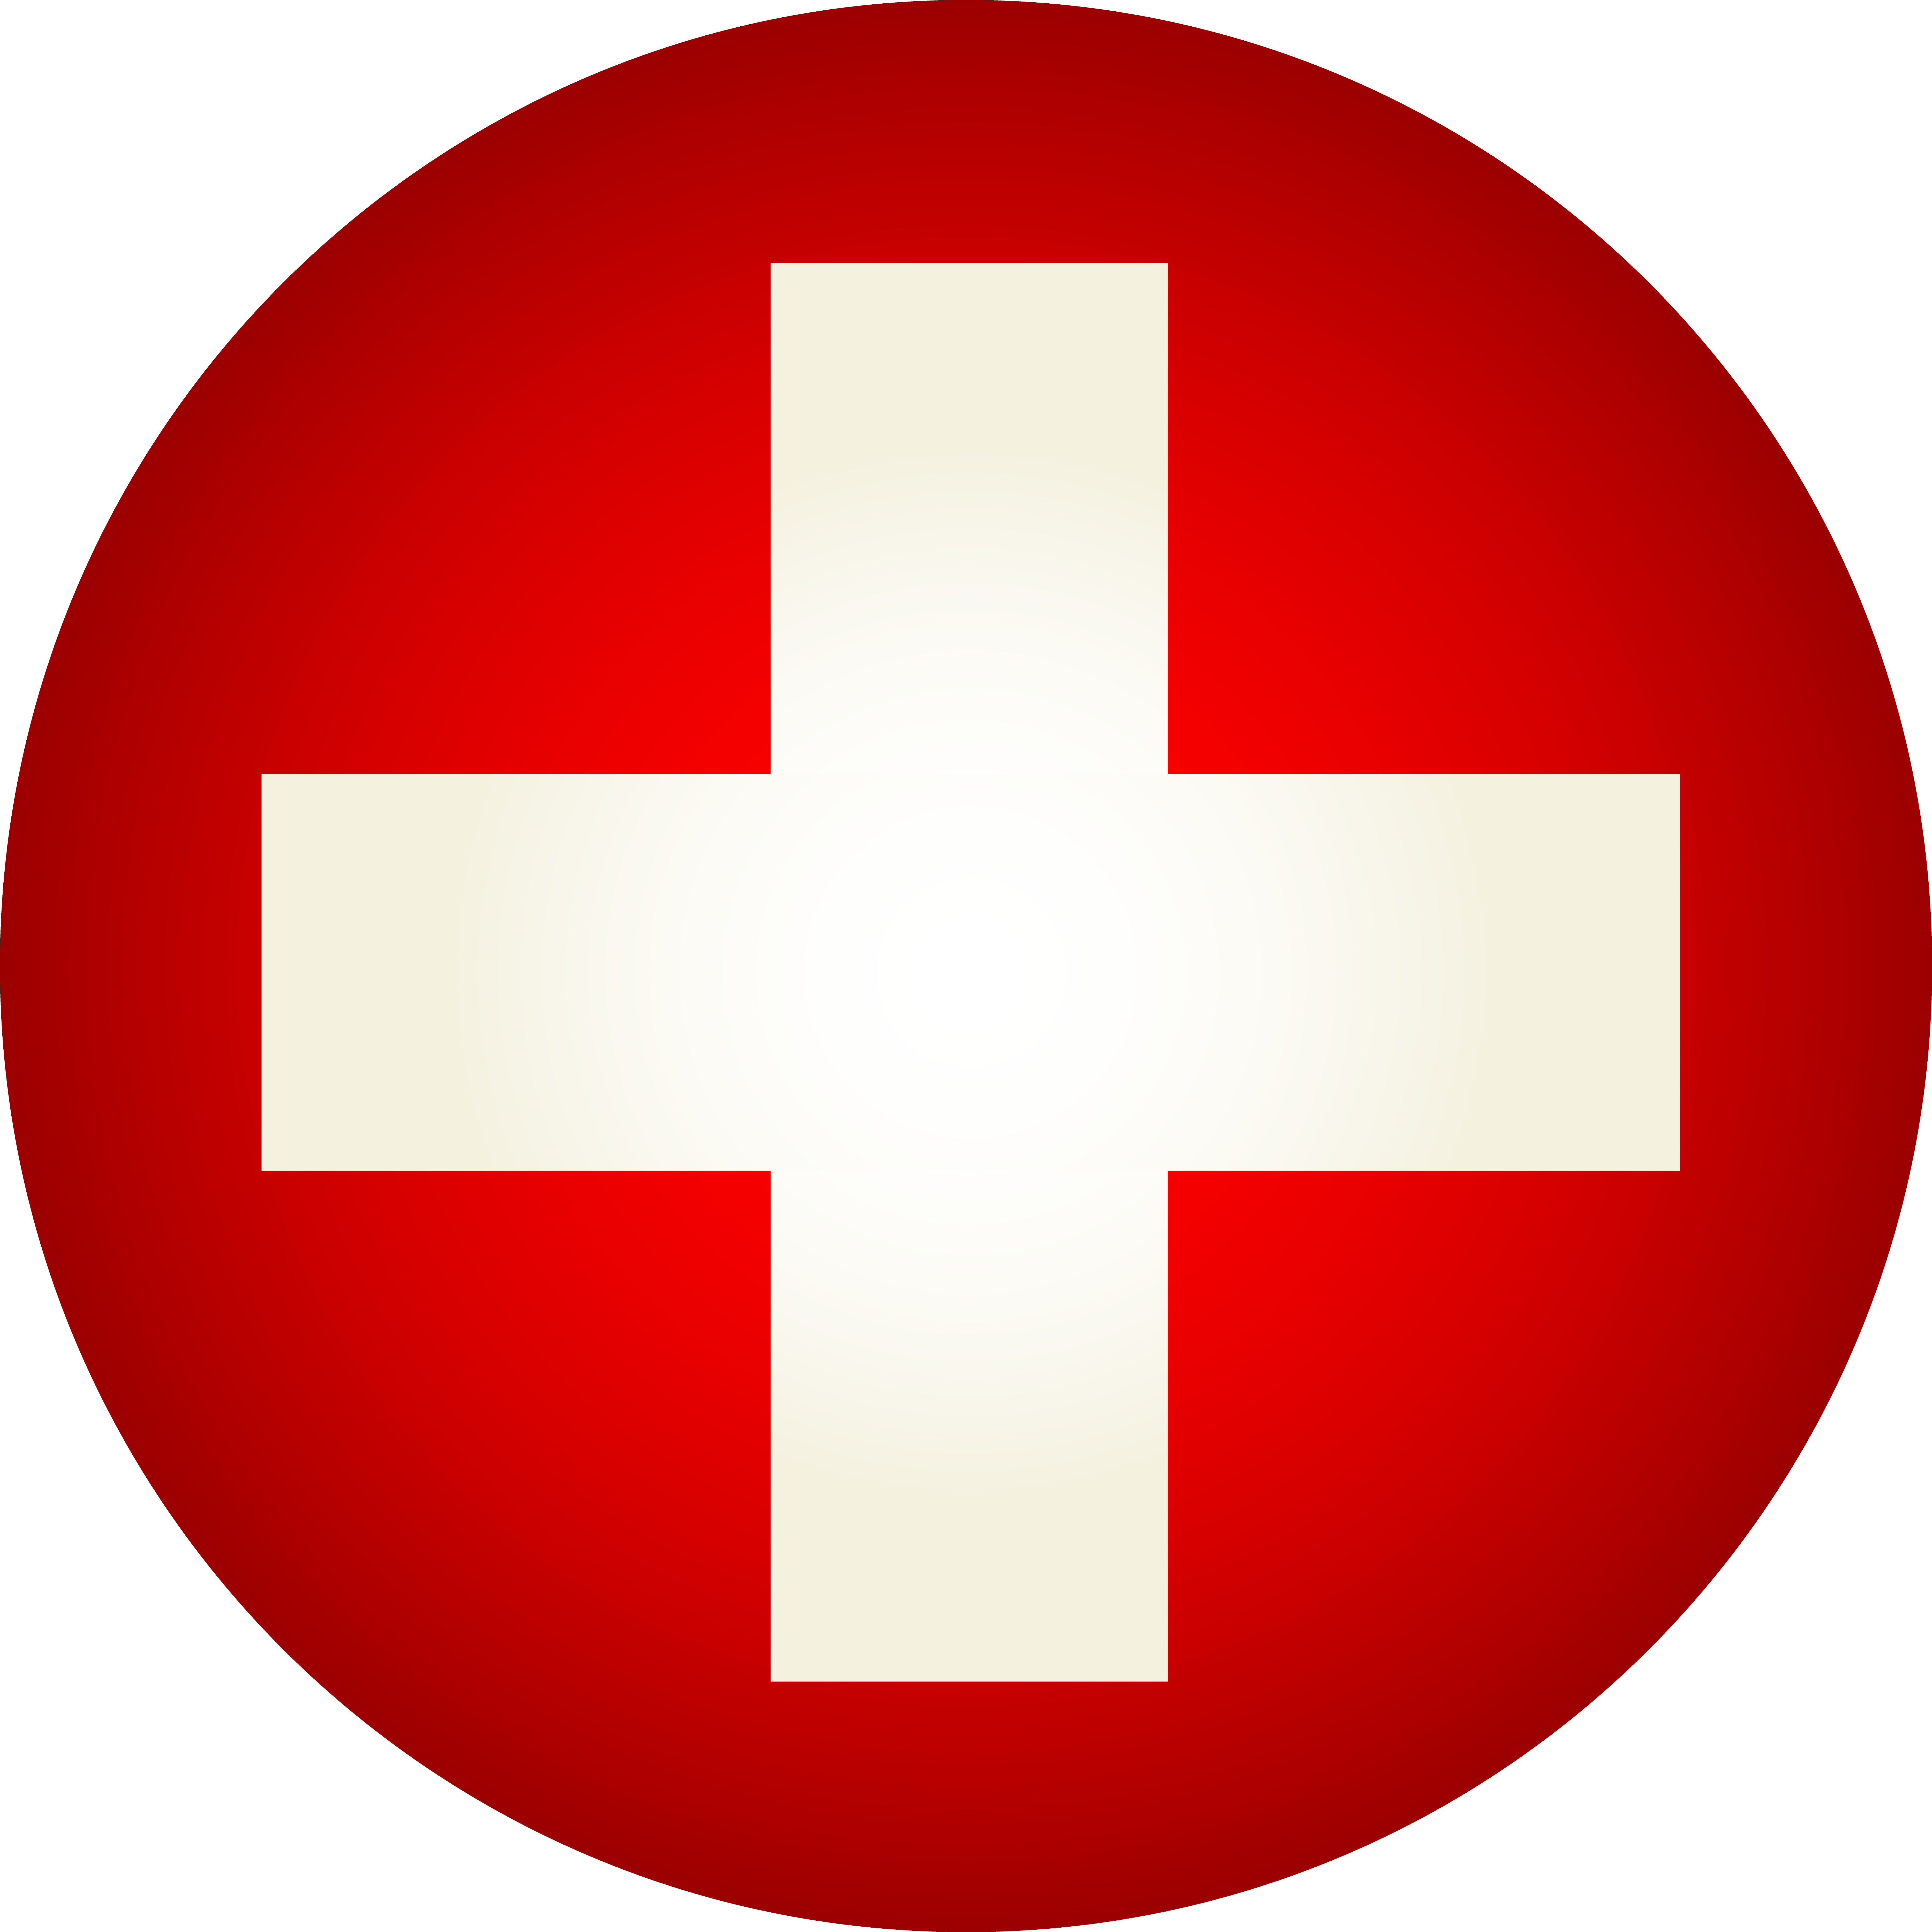 Red Black and White Cross Logo - White medical cross jpg free - RR collections